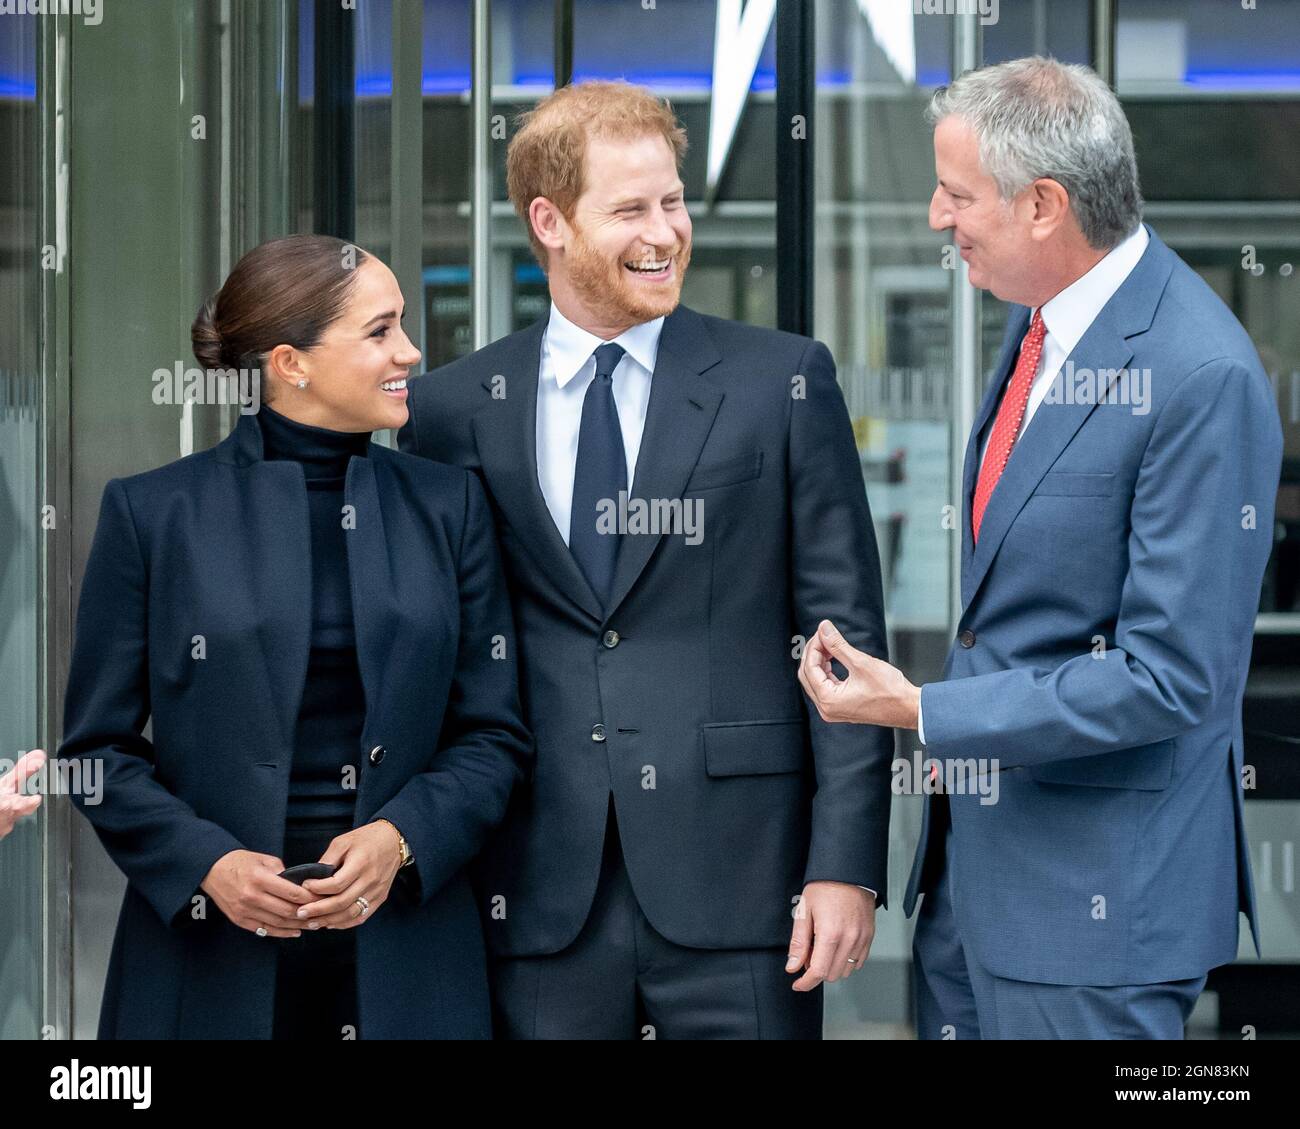 New York, USA. 23rd Sep, 2021. New York Mayor Bill de Blasio (R) talks to Prince Harry and Meghan, The Duke and Duchess of Sussex, as they exit One World Trade Center after visitng the One World Observatory in New York City. Credit: Enrique Shore/Alamy Live News Stock Photo